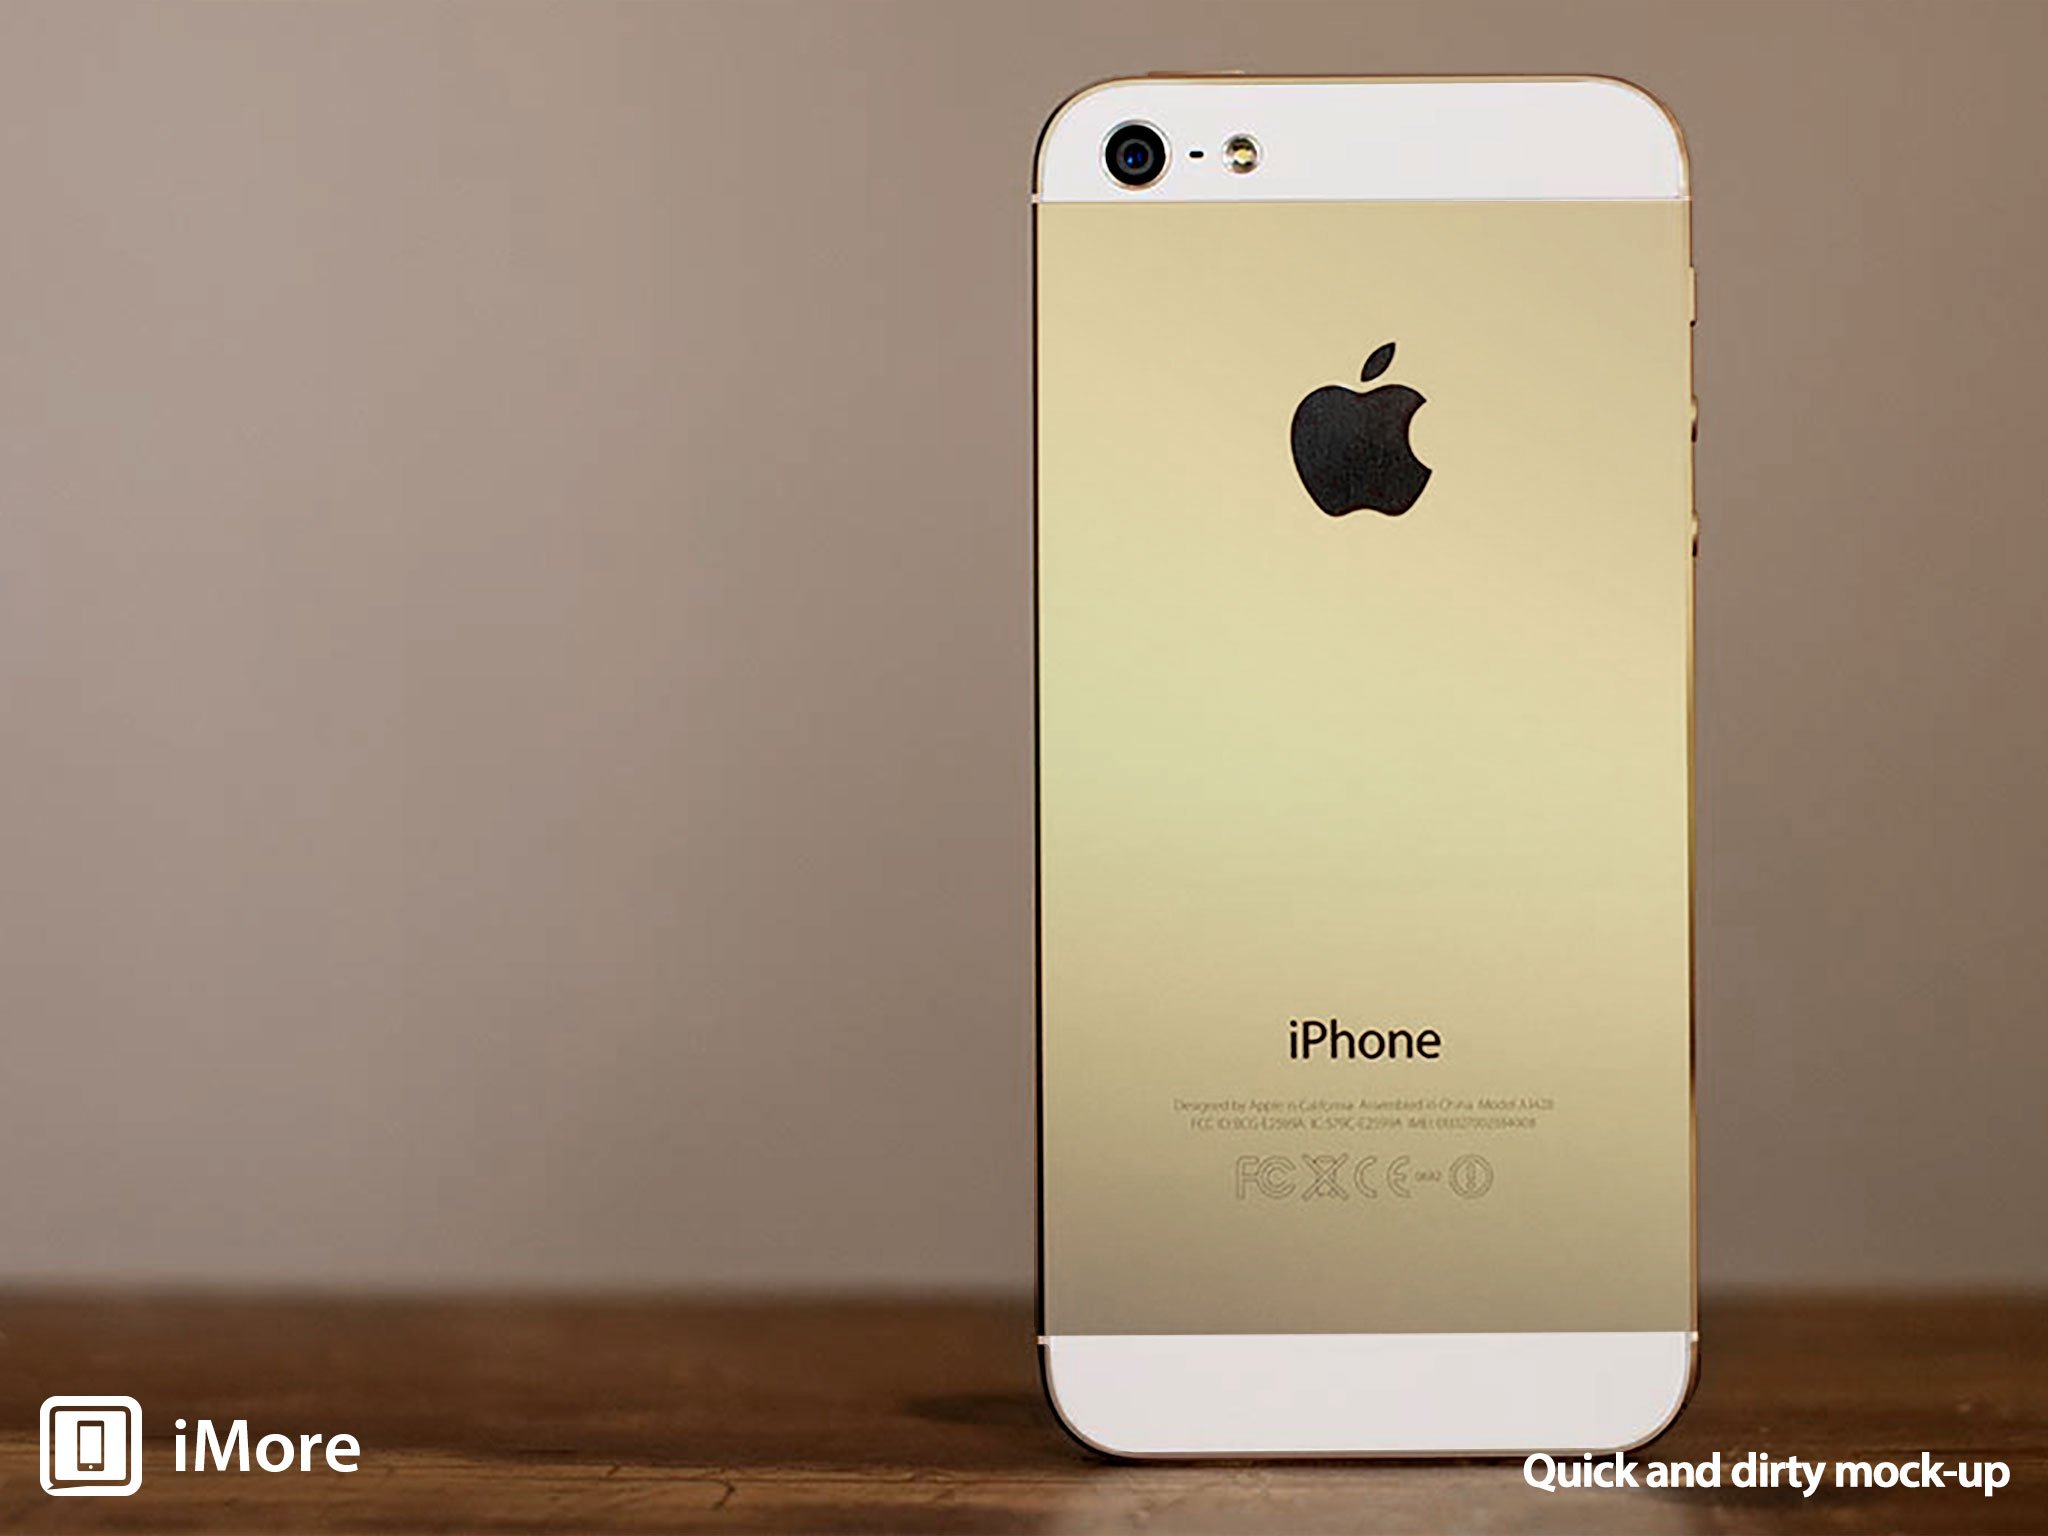 Gold iPhone 5s quick and dirty mock up - NOT A REAL PRODUCT SHOT YO